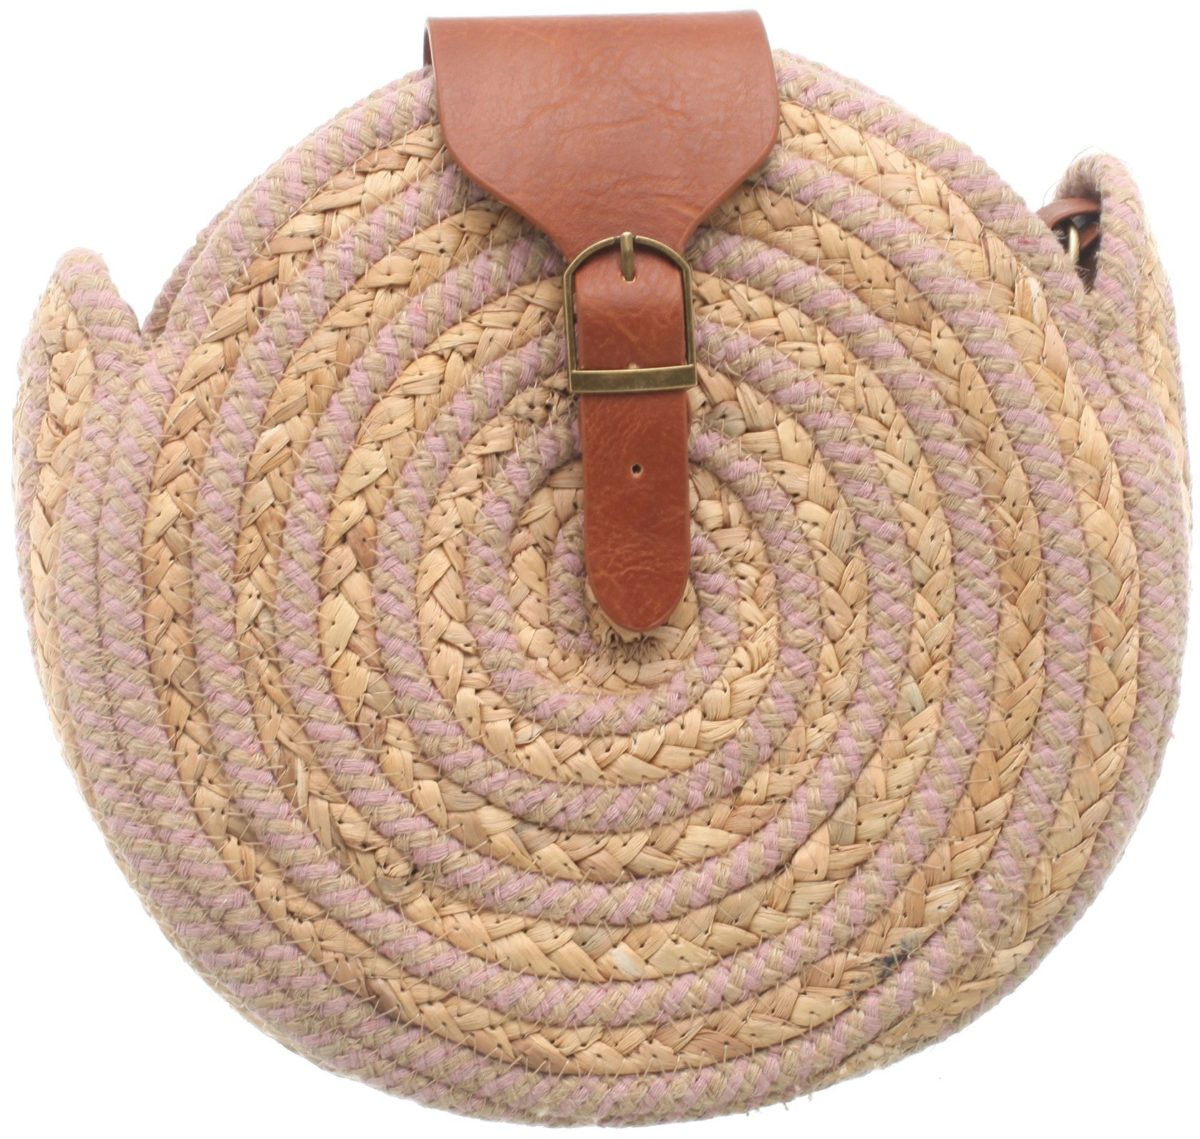 pink and beige round ratan bag, brown handel and long brown leather strap